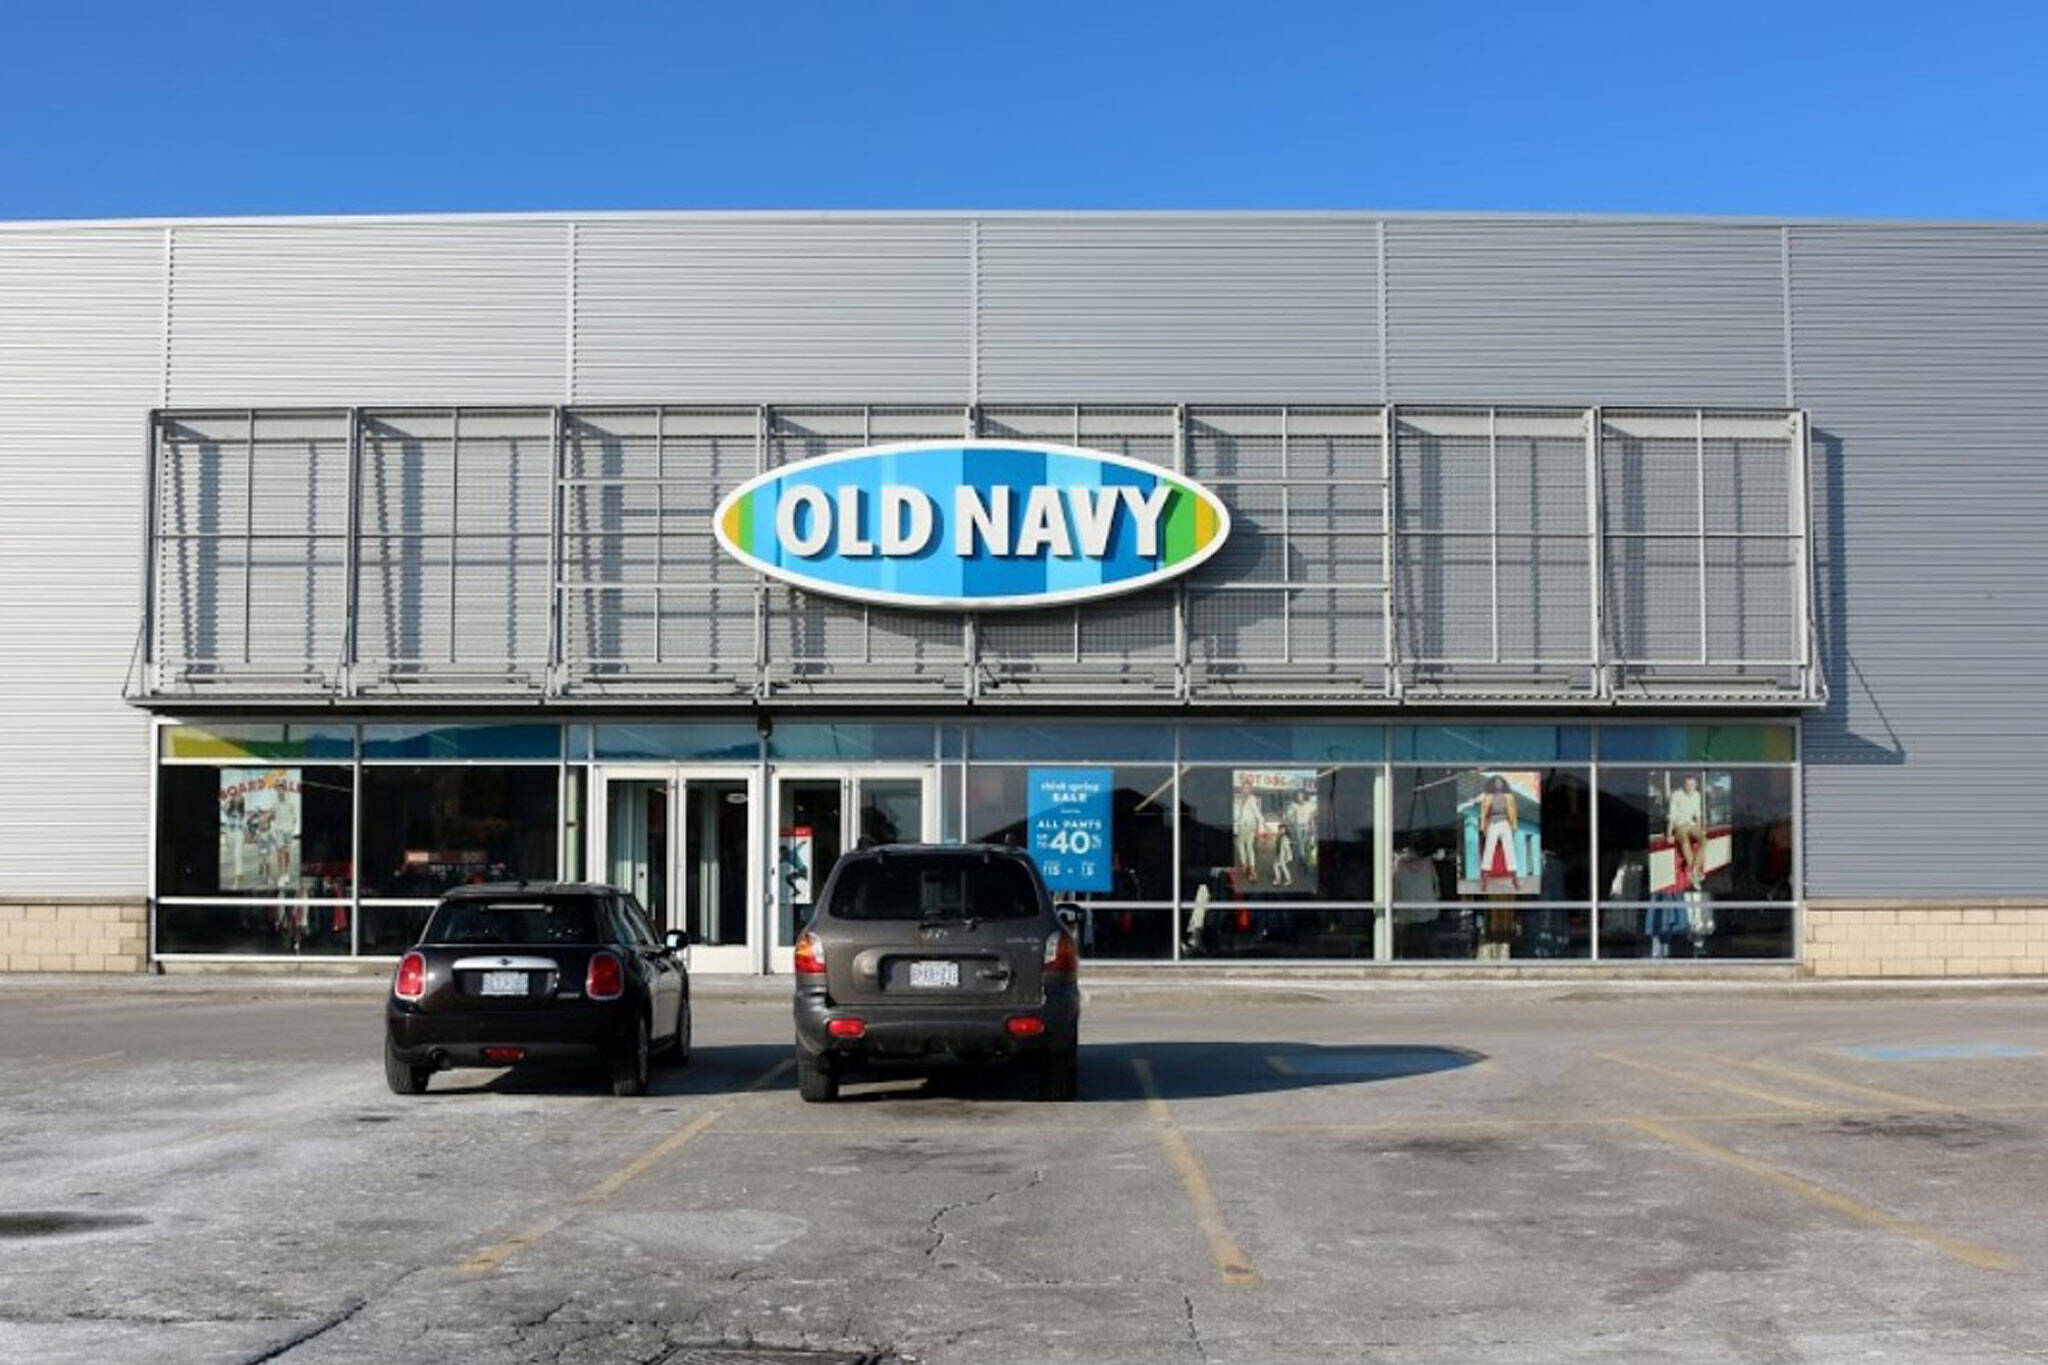 old navy canada